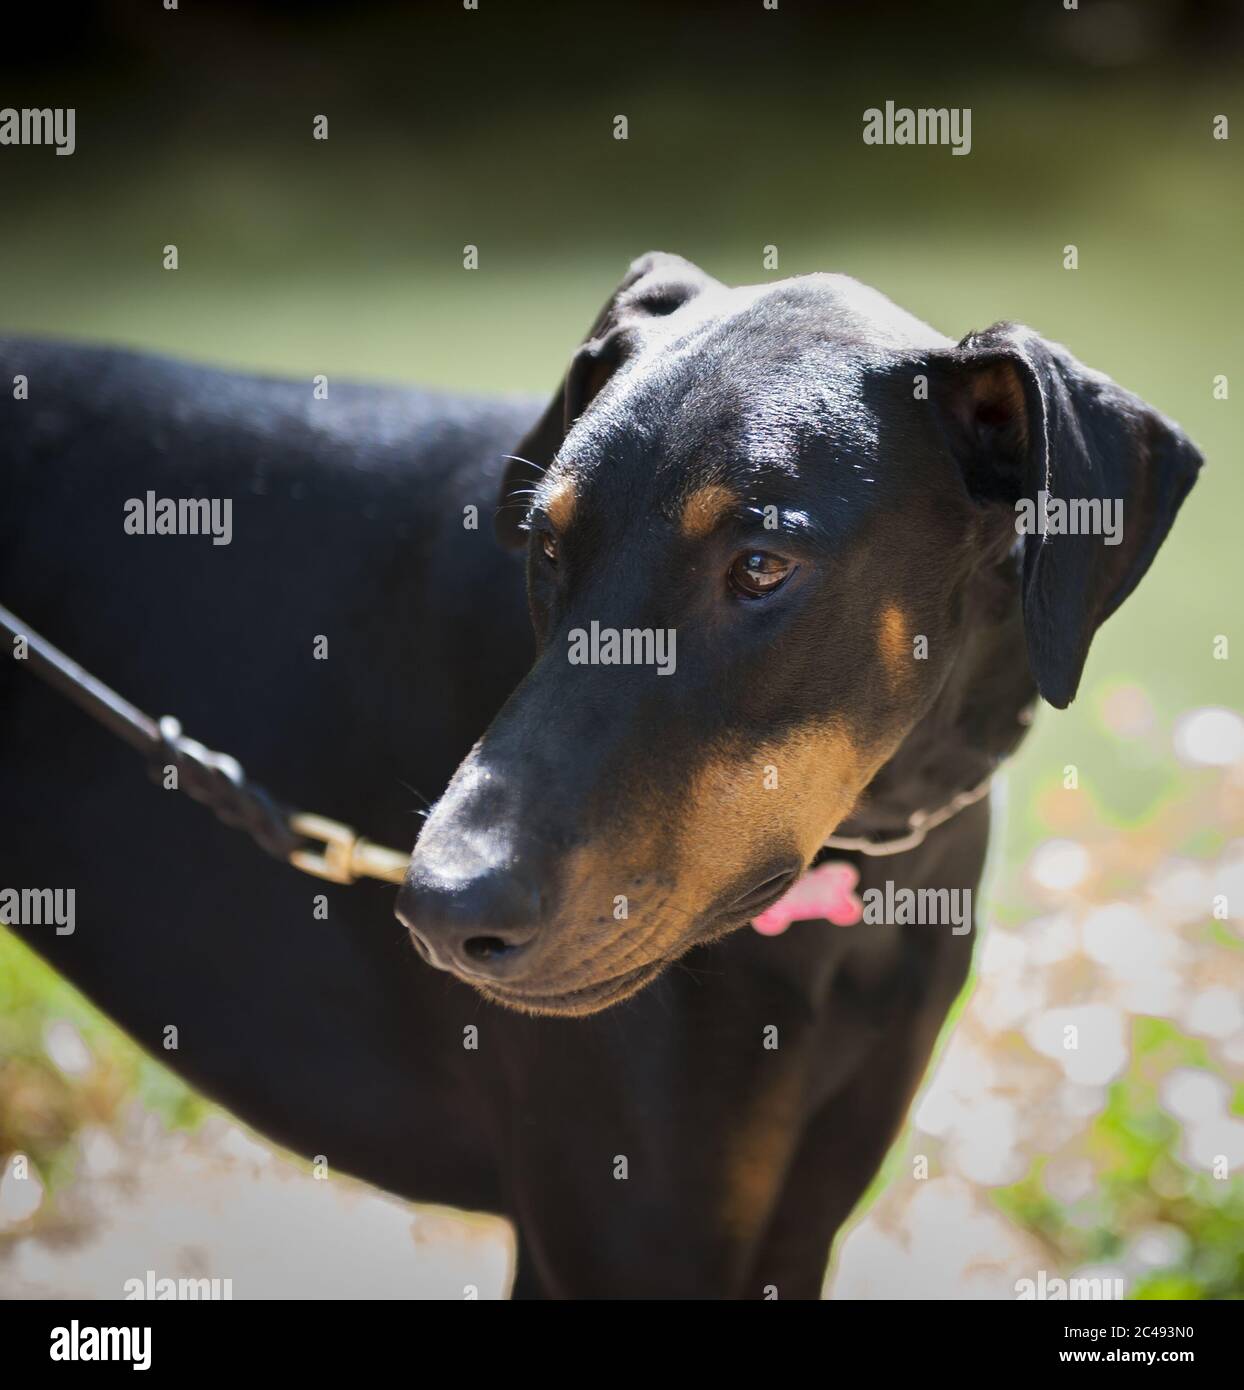 Closeup shot of a Doberman on a leash in a field under the sunlight with a blurry background Stock Photo